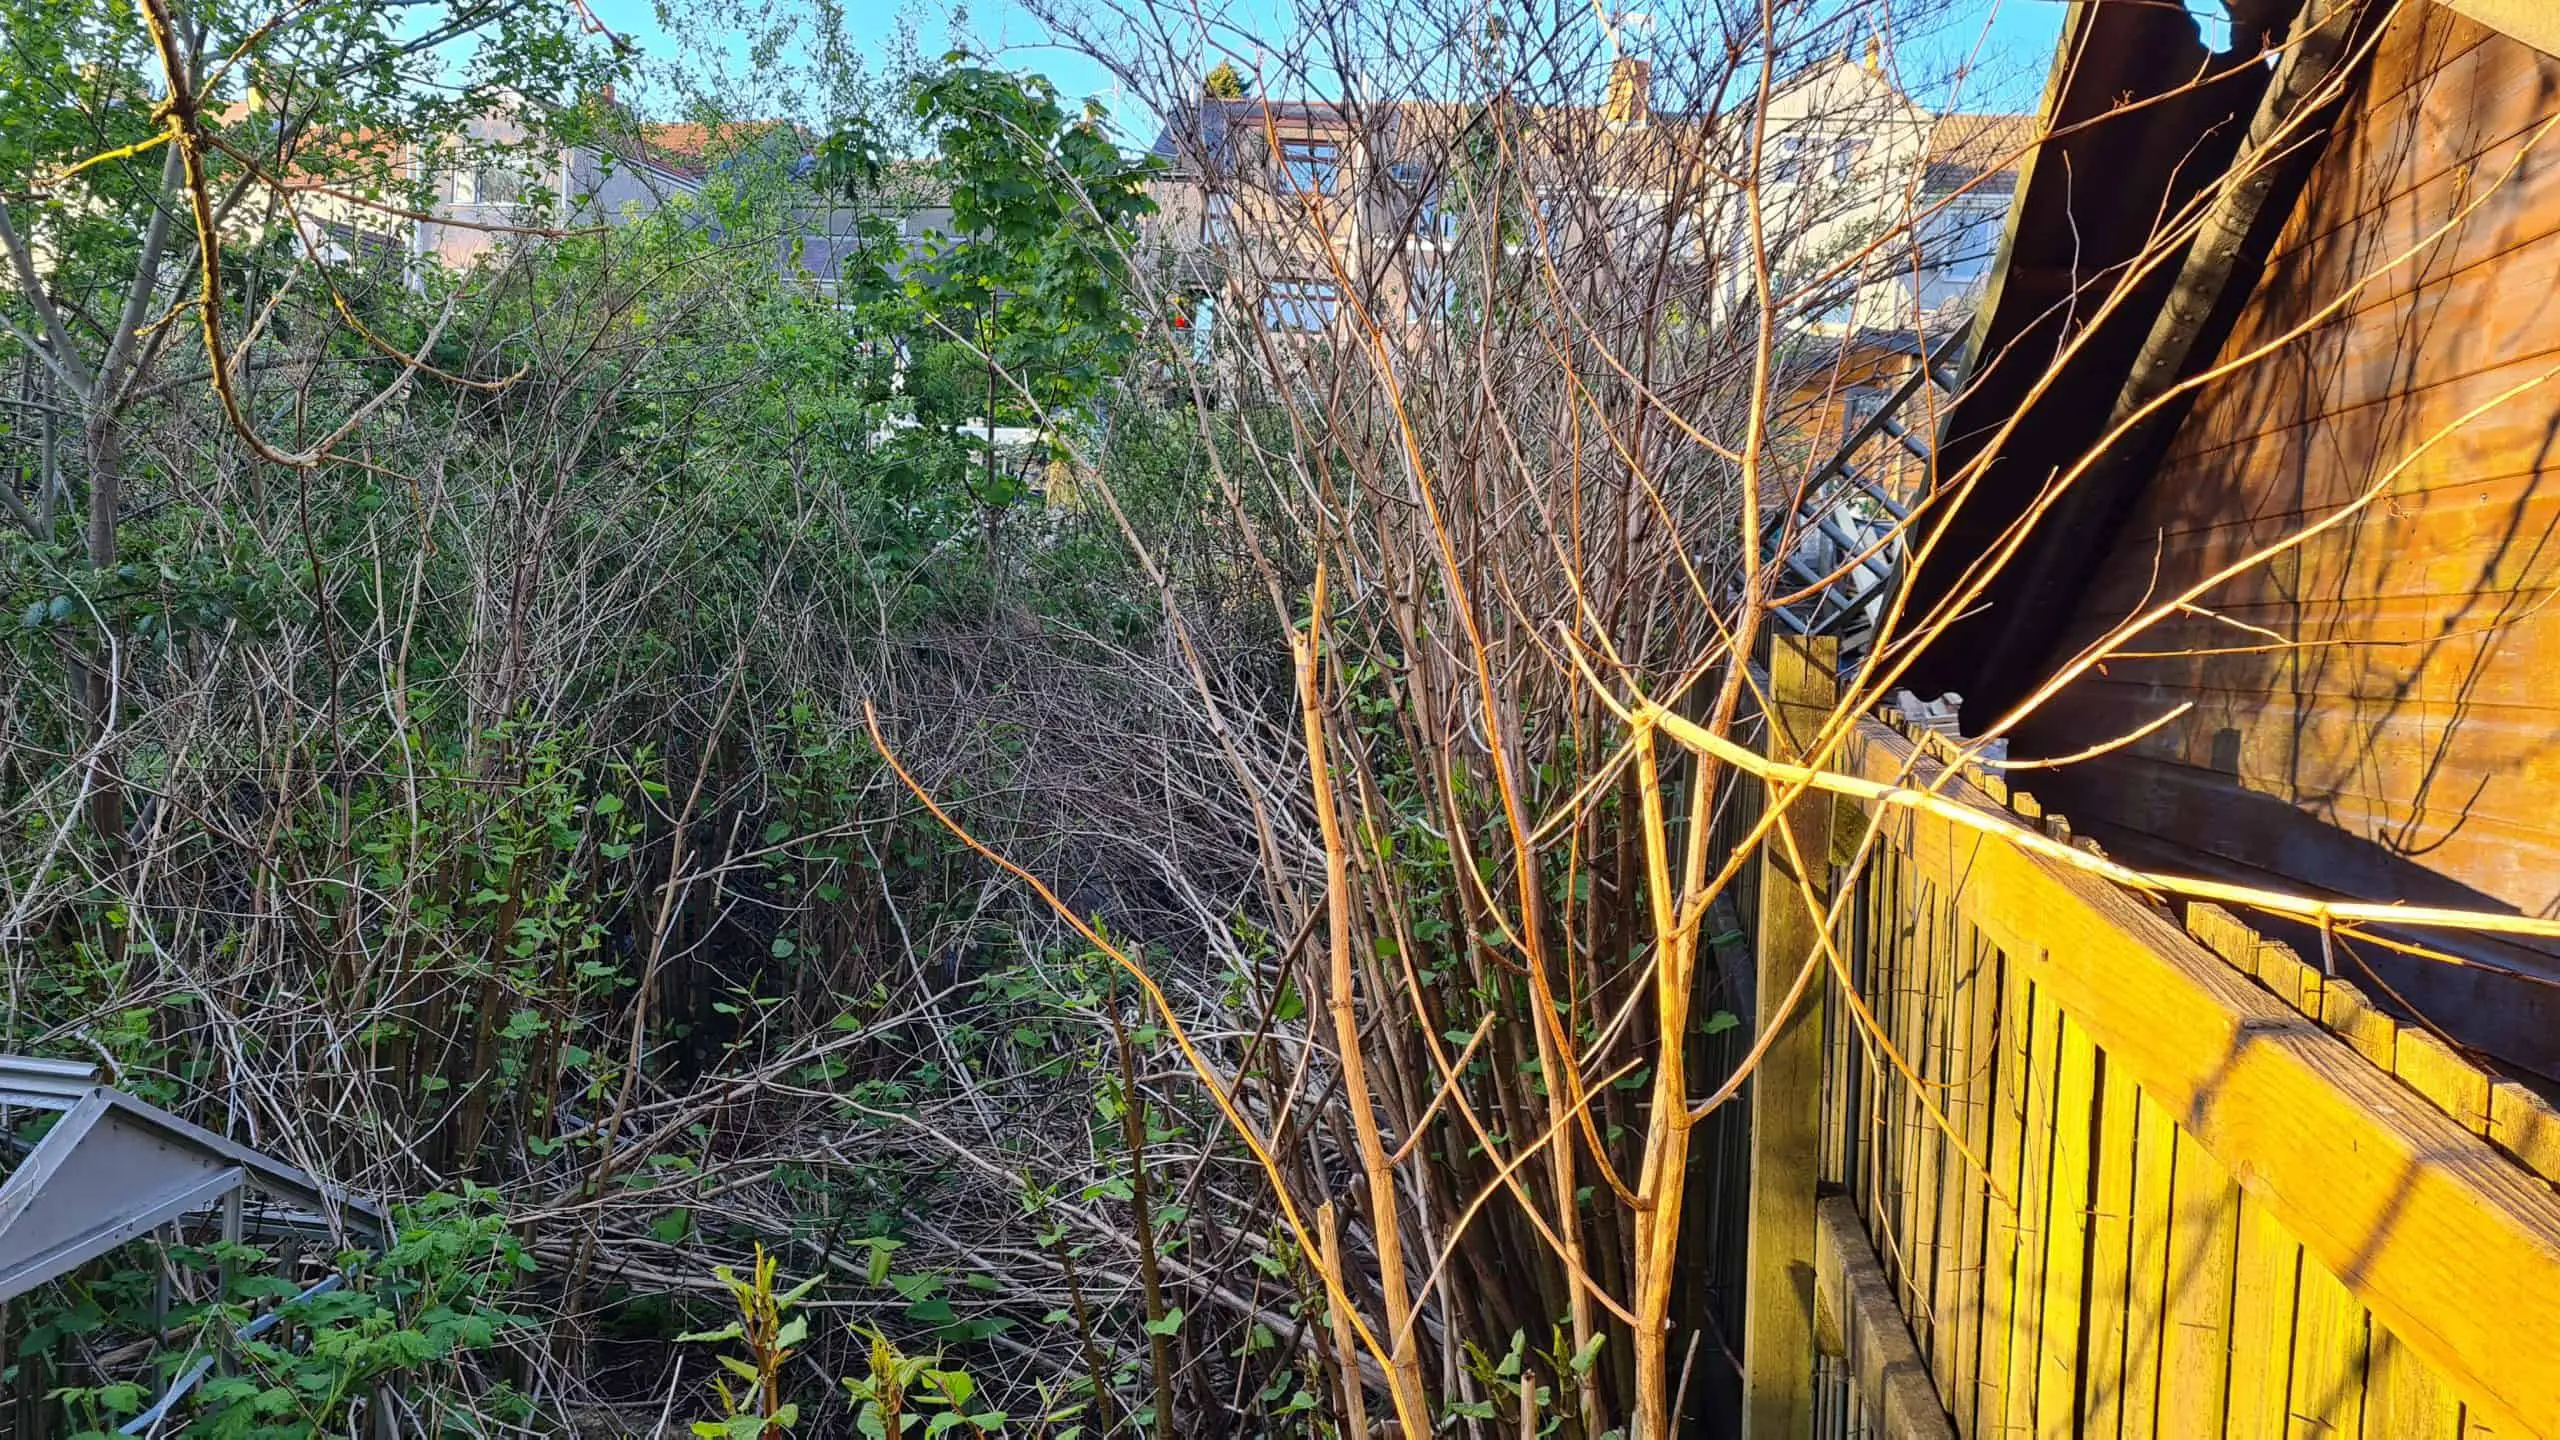 Should i buy a house with Japanese knotweed